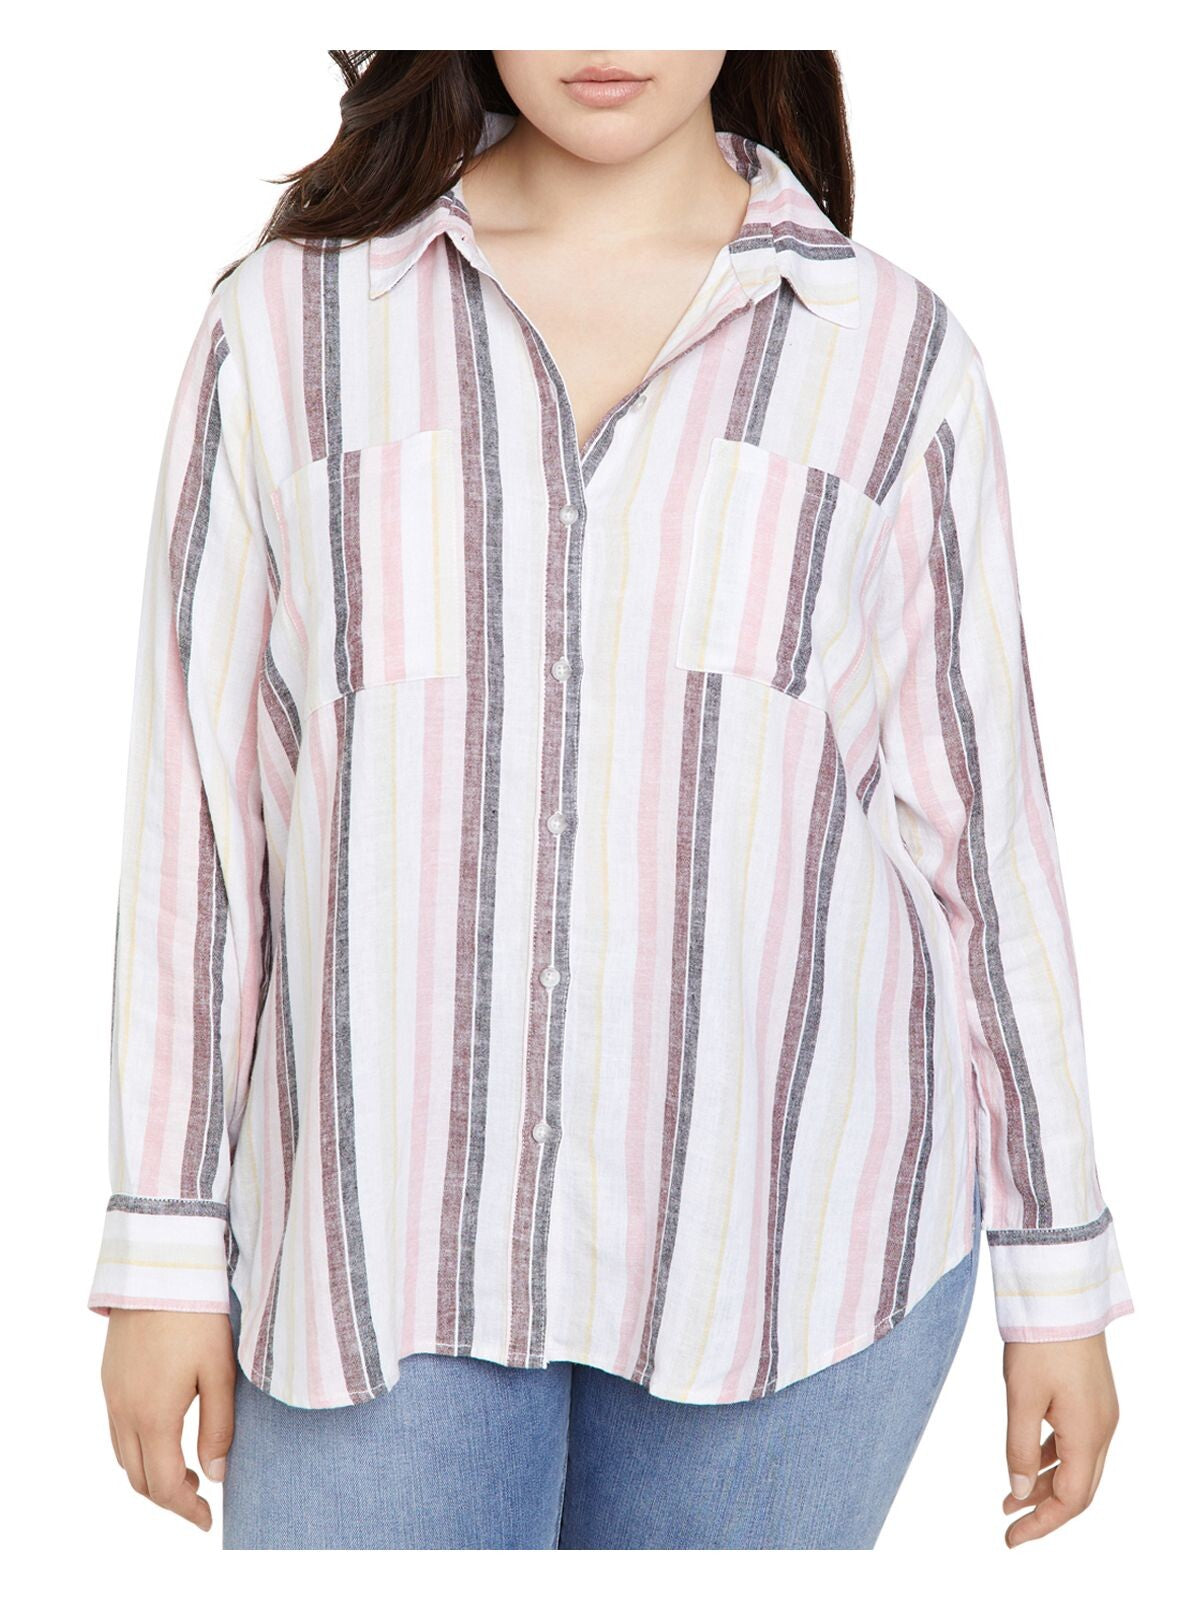 SANCTUARY Womens White Pocketed Boyfriend Vented Sides Round Hem Striped Cuffed Sleeve Collared Button Up Top Plus 2X